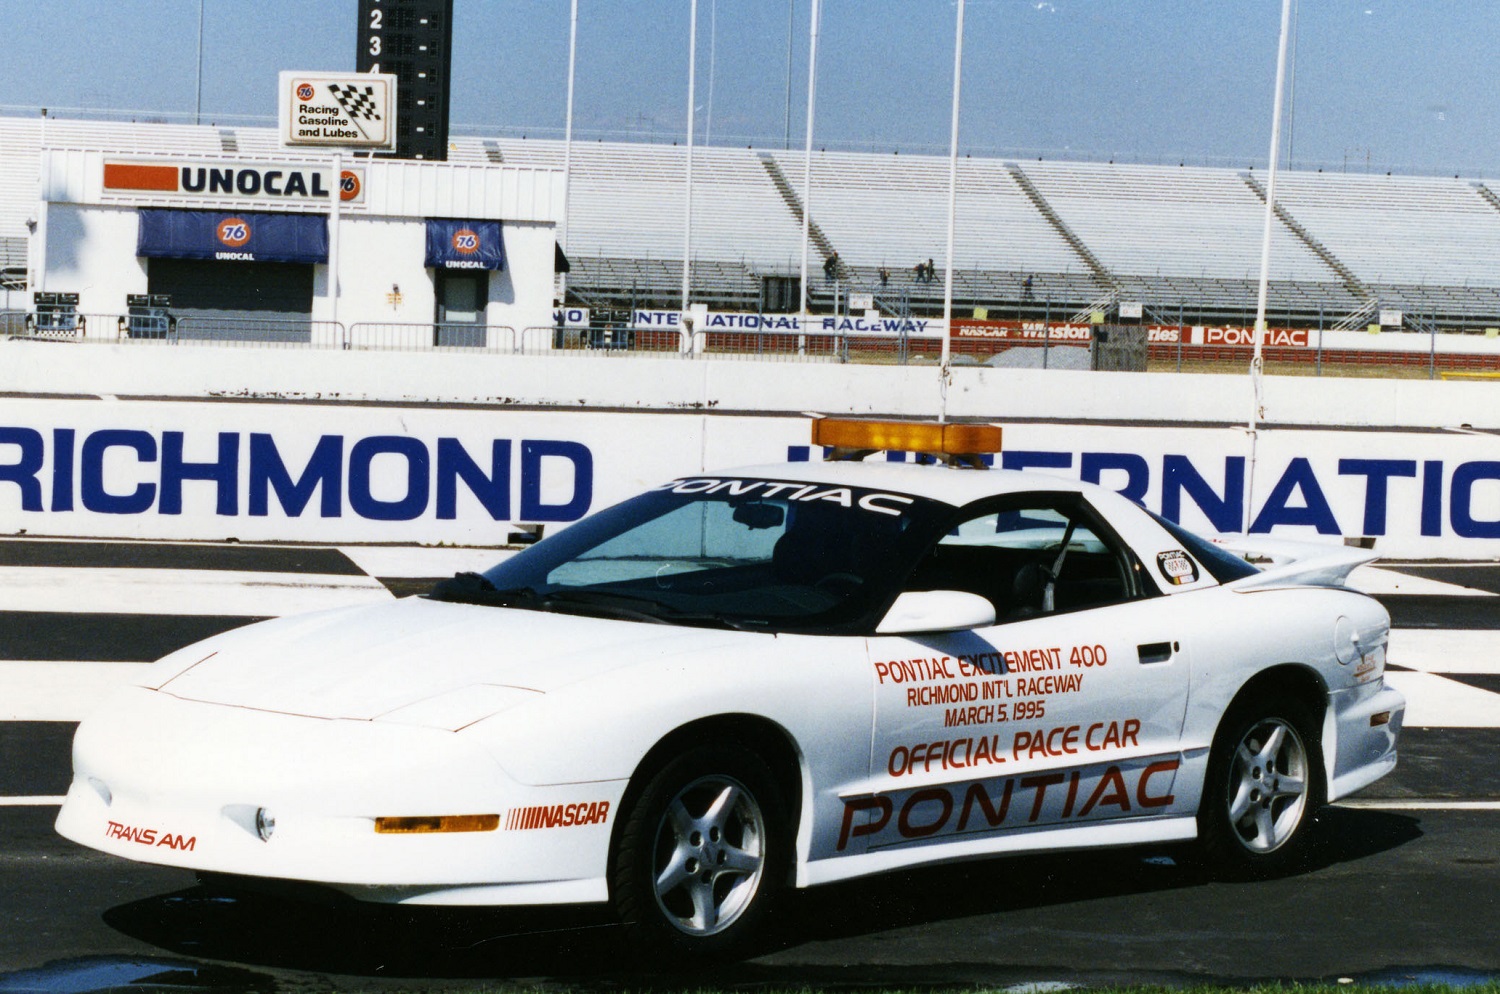 A photo of the Pontiac Trans Am that was used as a pace car at Richmond International Raceway.